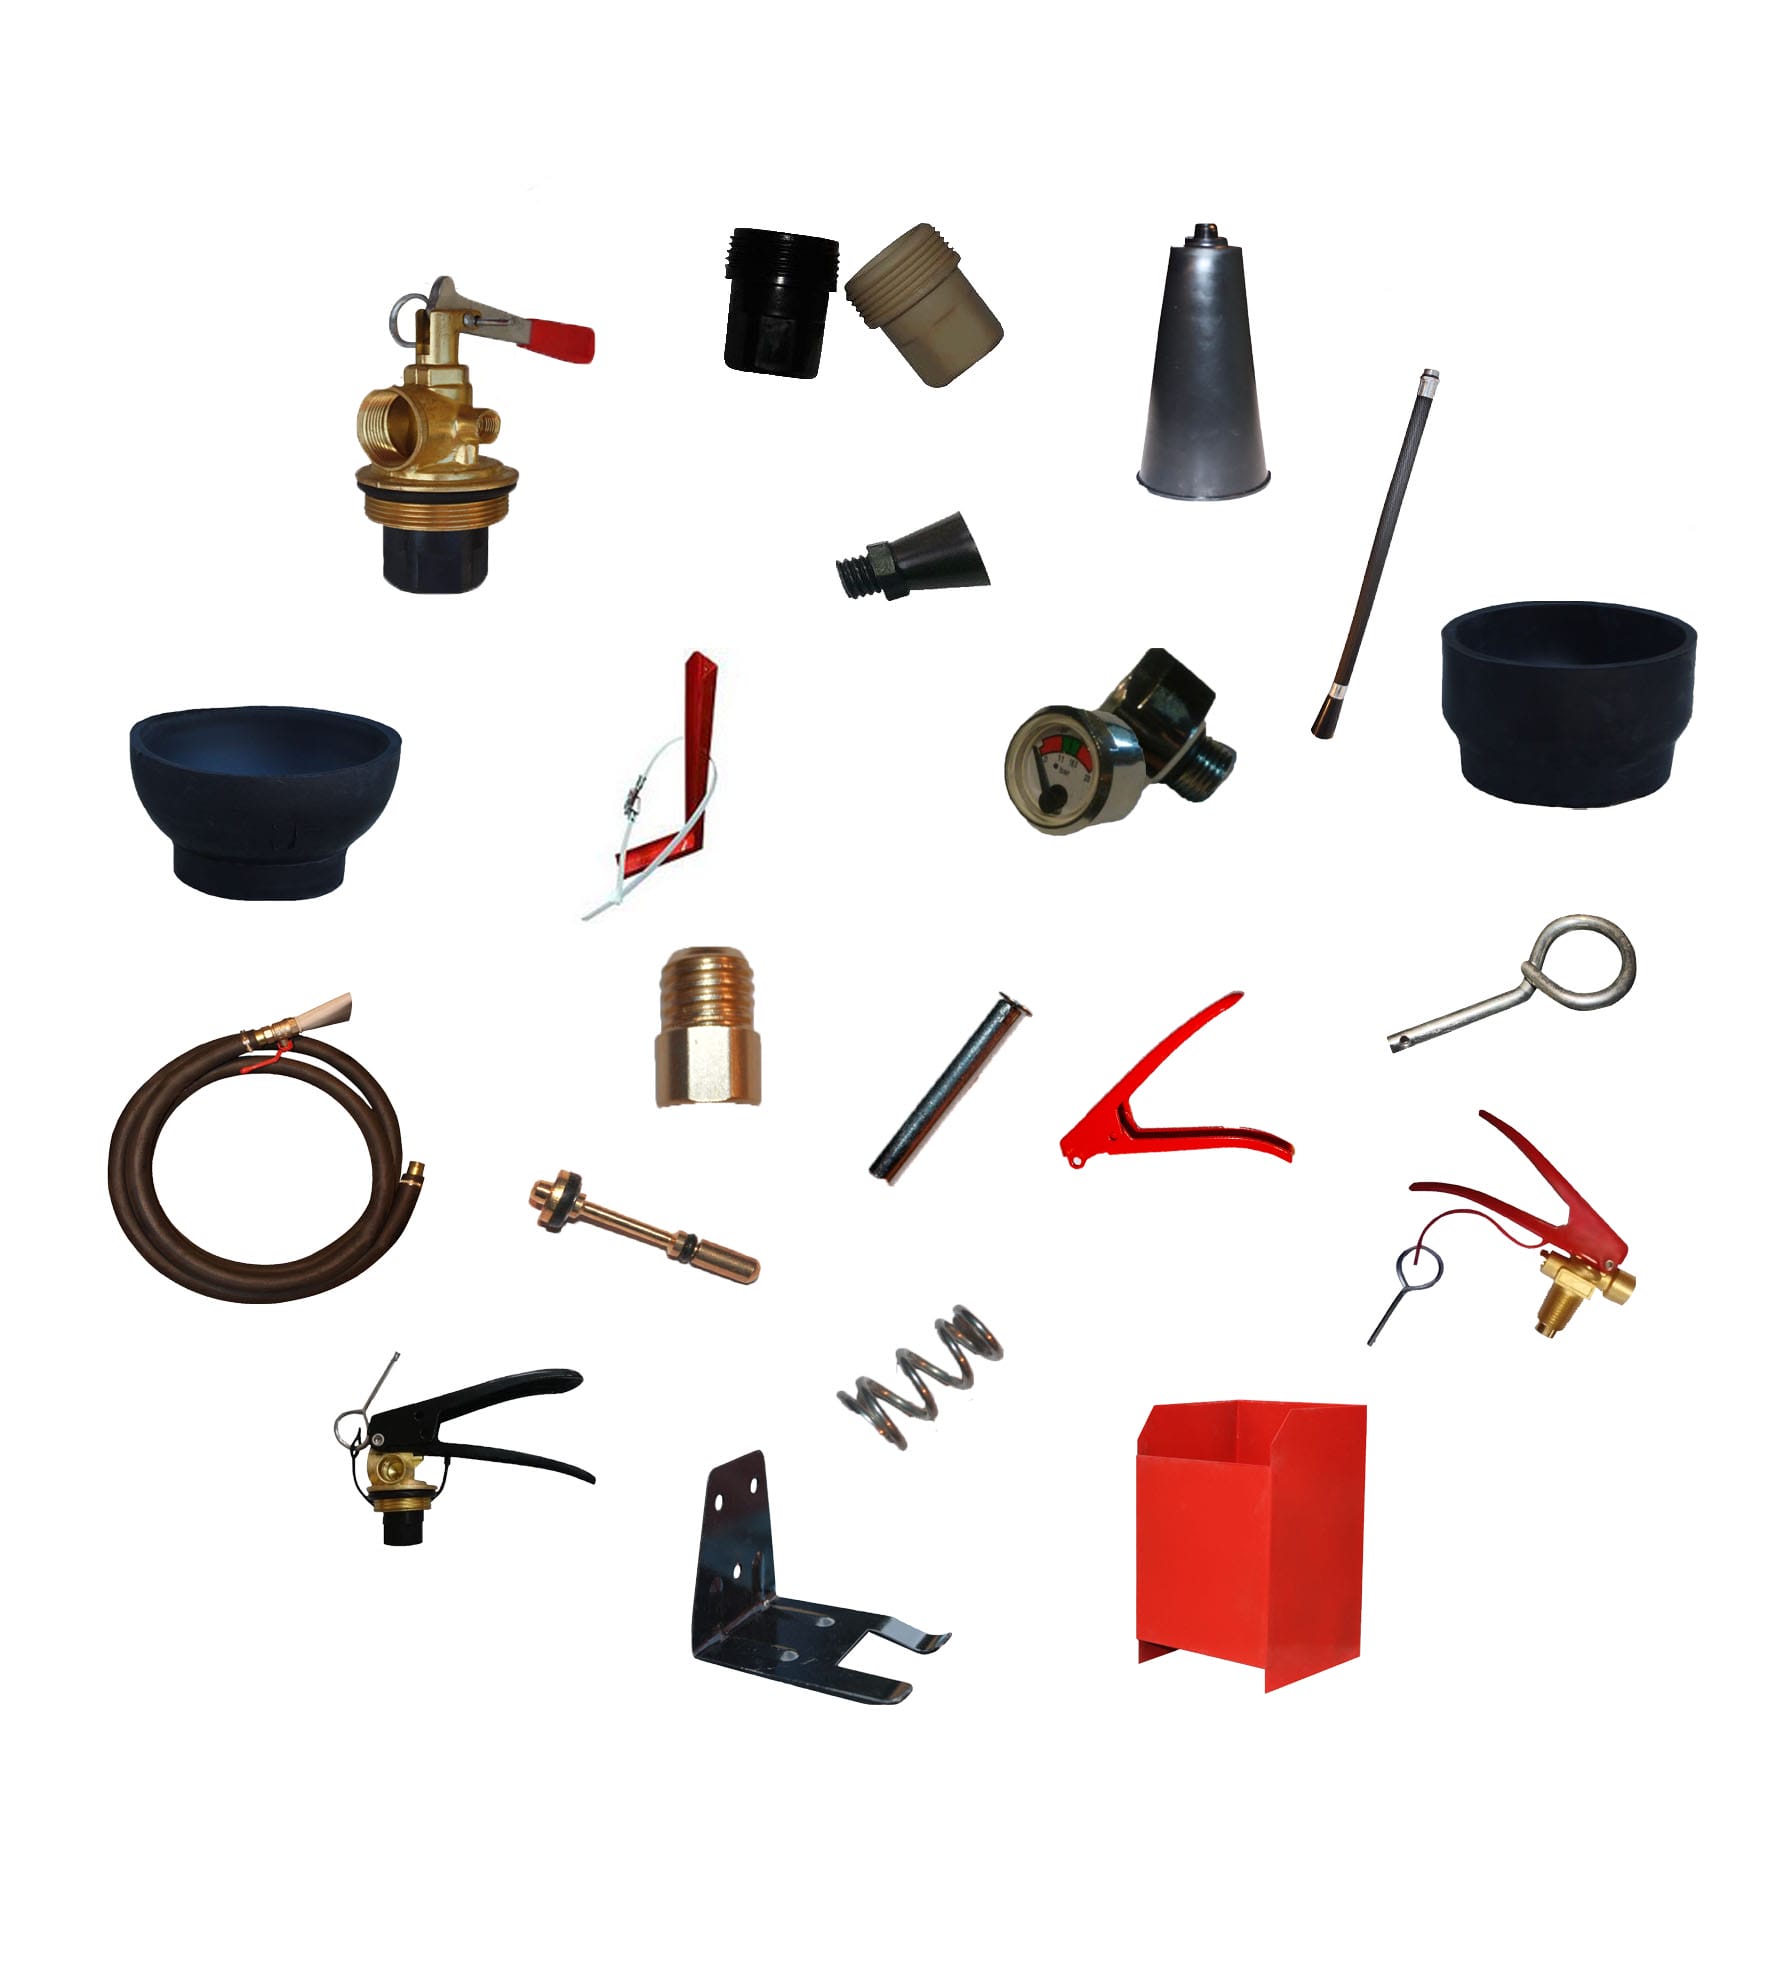 Accessories for fire extinguishers